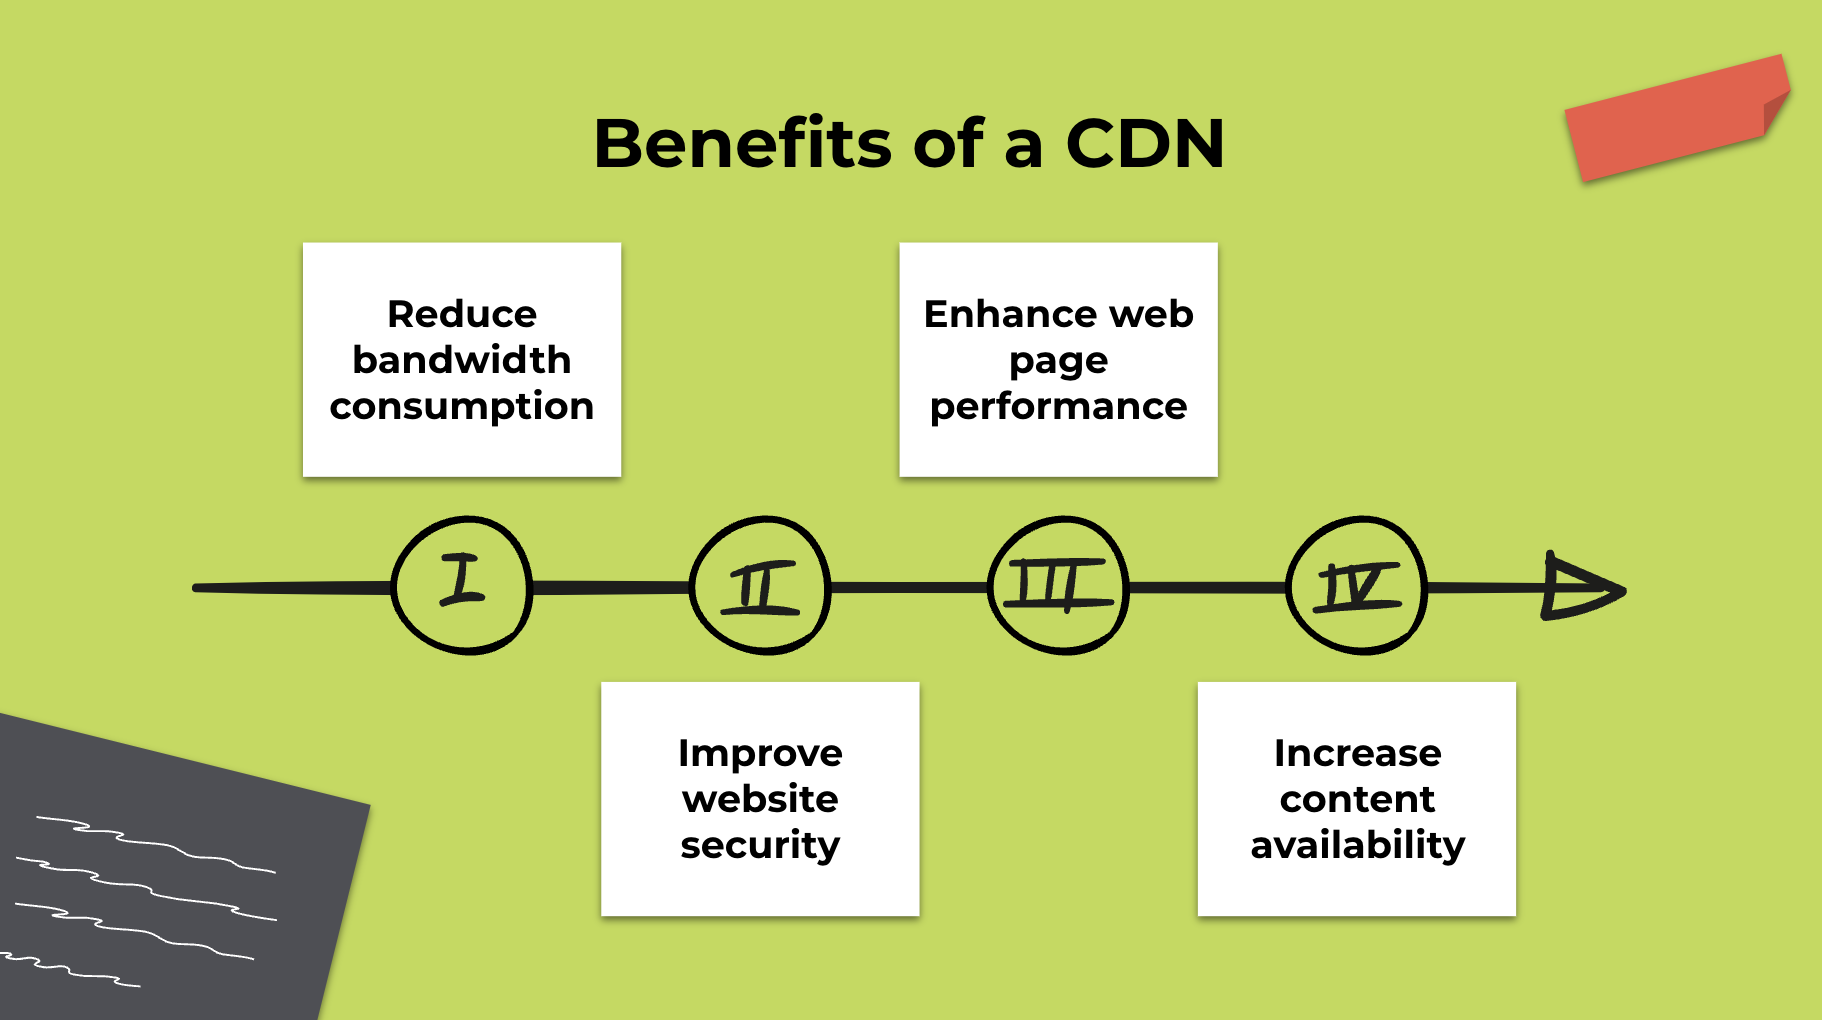 CDN offers a wide range of benefits to enhance web hosting for businesses